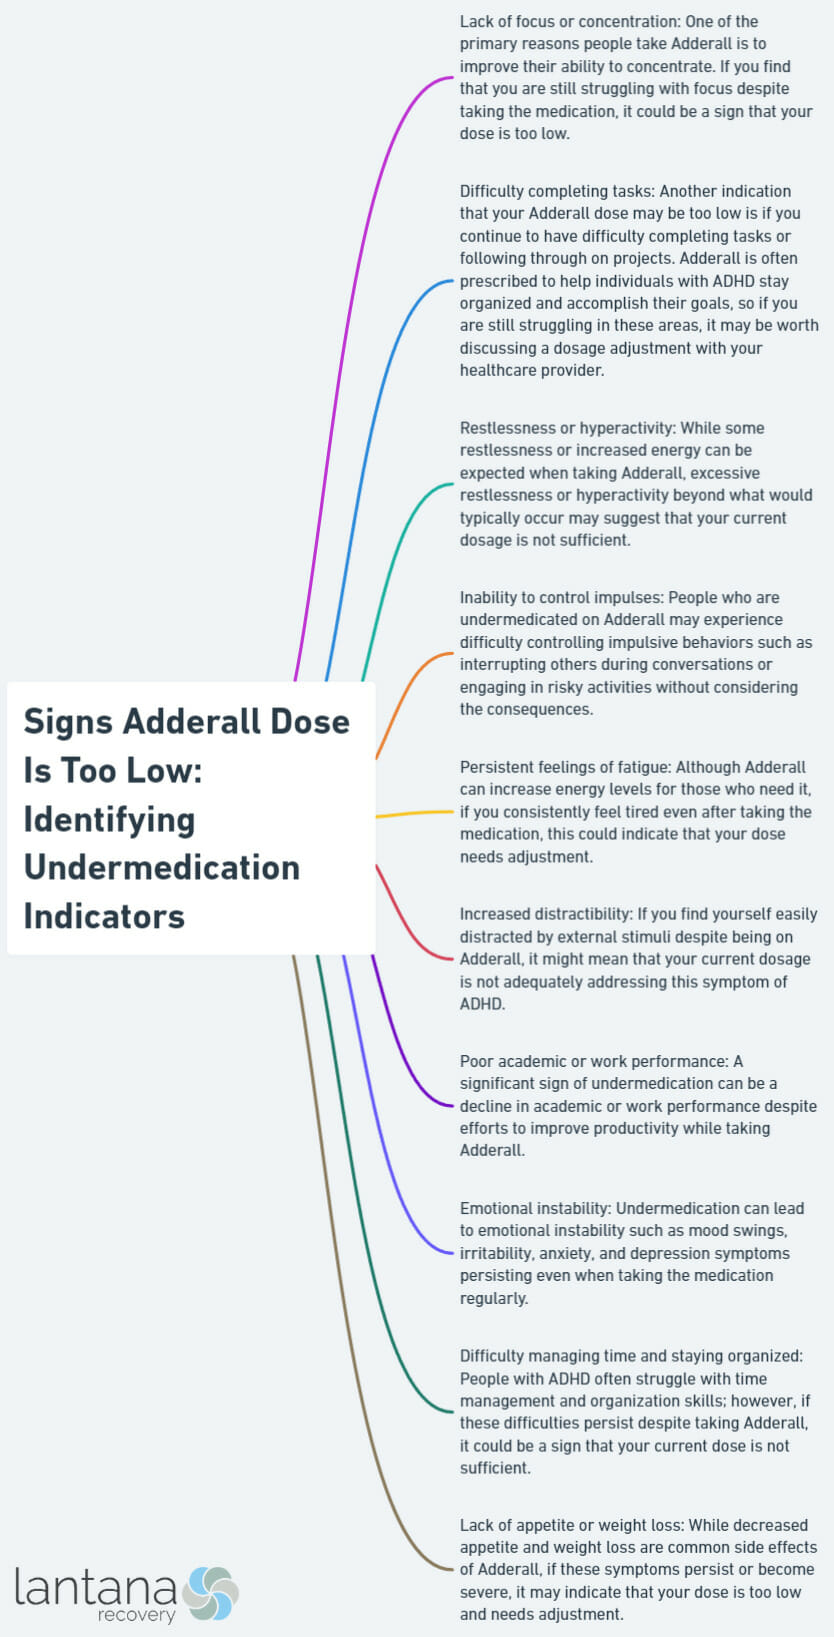 Signs Adderall Dose Is Too Low: Identifying Undermedication Indicators